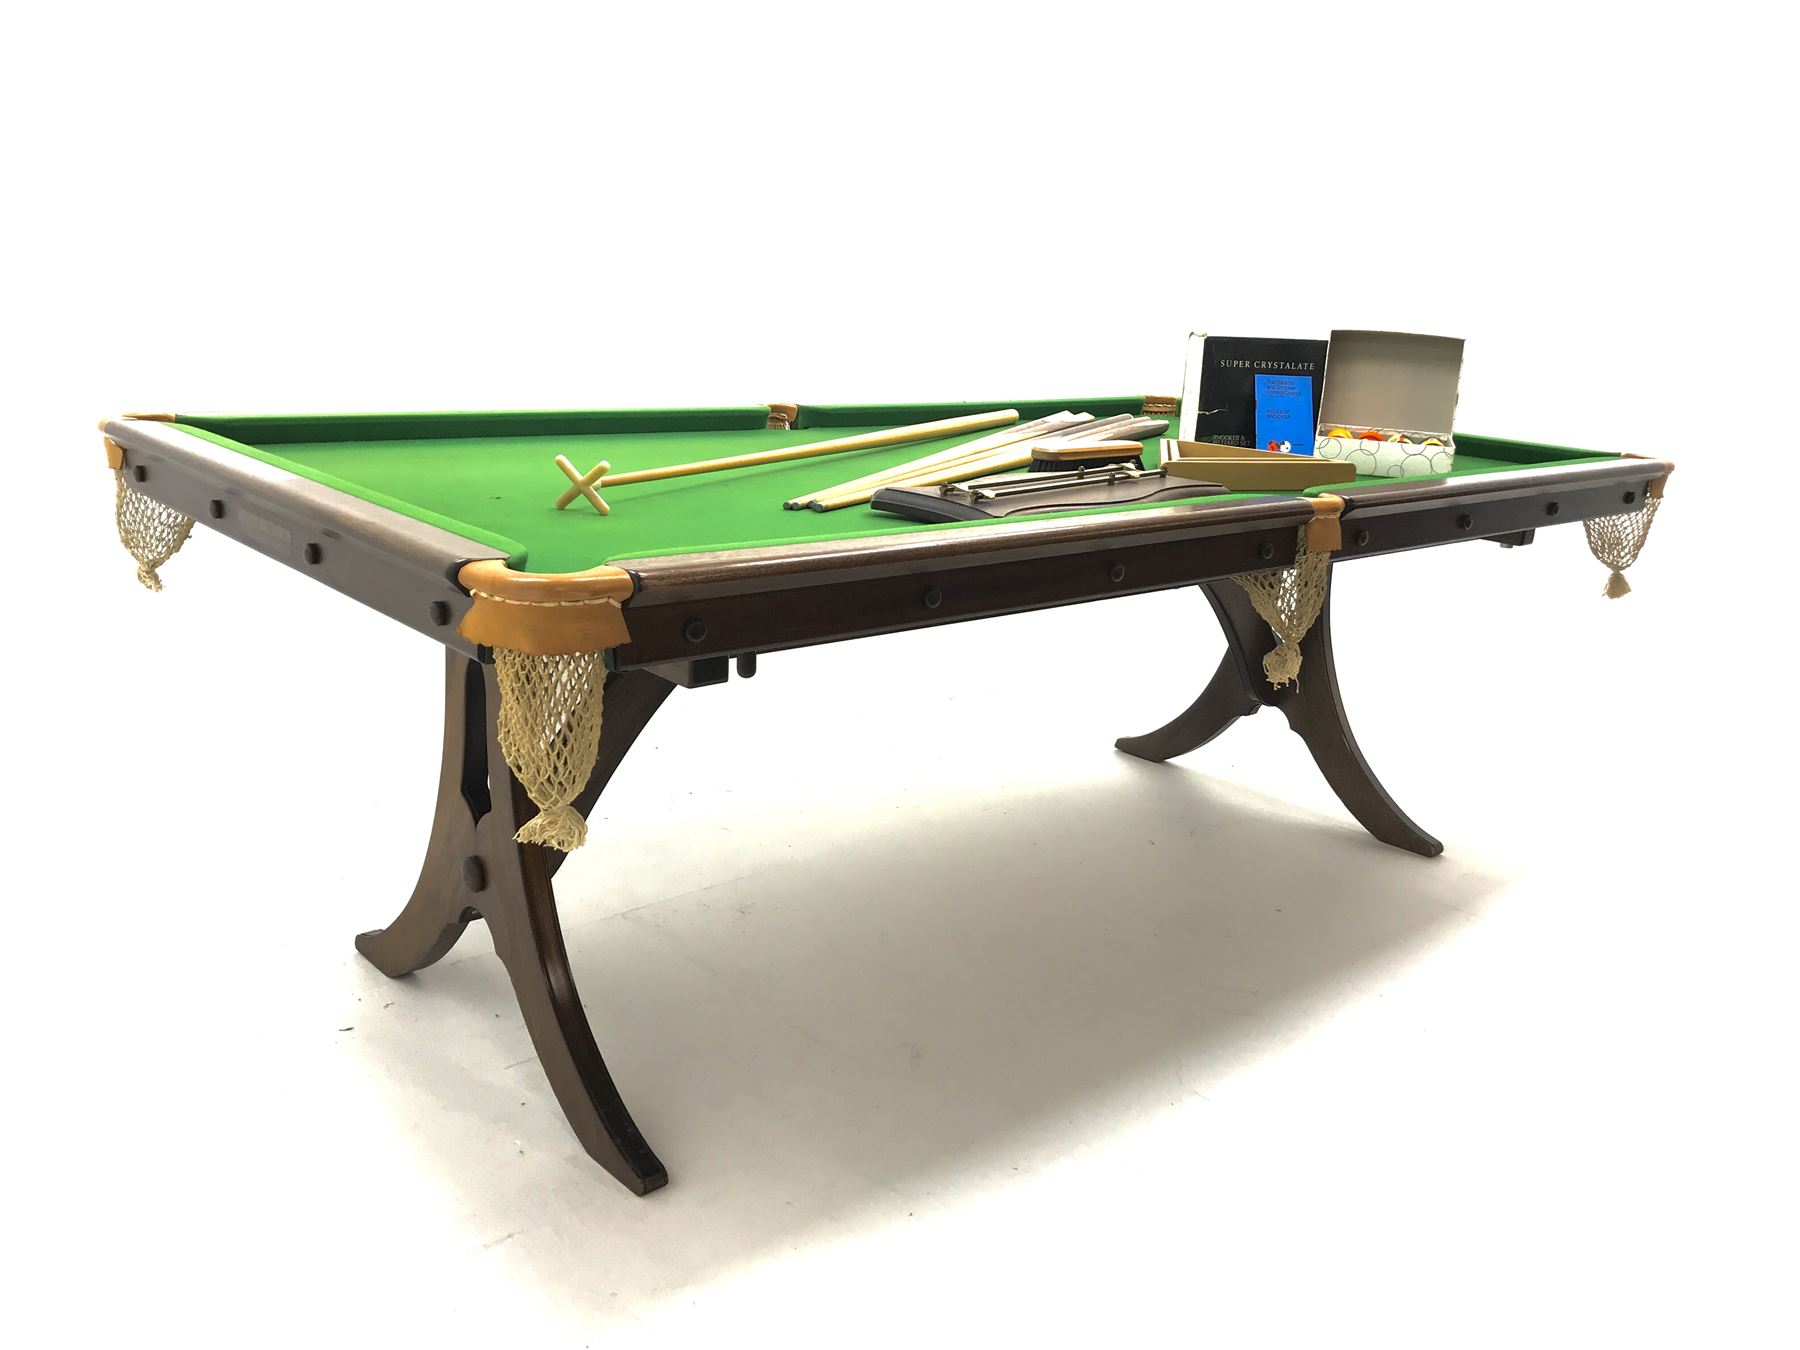 Allied Billiards slate bed snooker dining table - Image 3 of 7